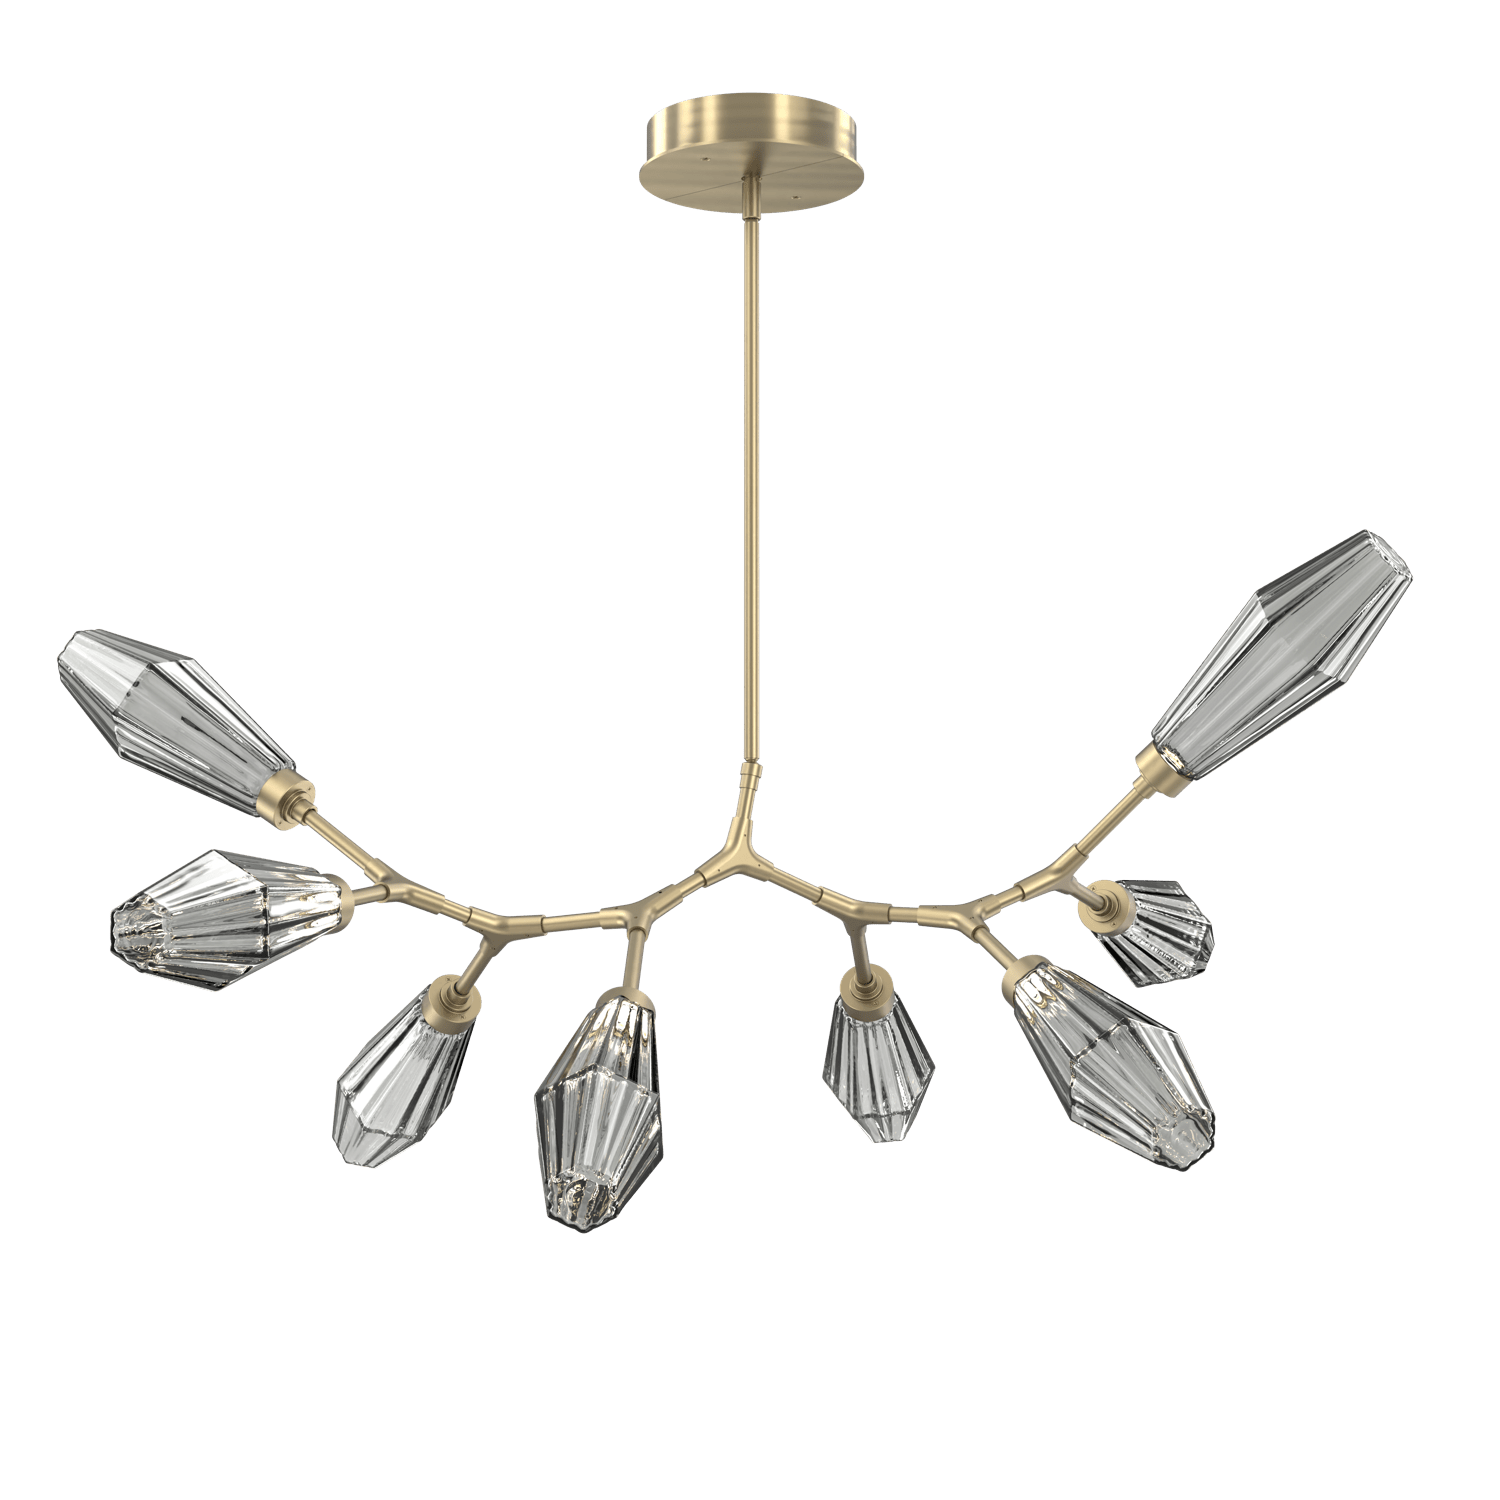 PLB0049-BB-HB-RS-Hammerton-Studio-Aalto-8-light-modern-branch-chandelier-with-heritage-brass-finish-and-optic-ribbed-smoke-glass-shades-and-LED-lamping